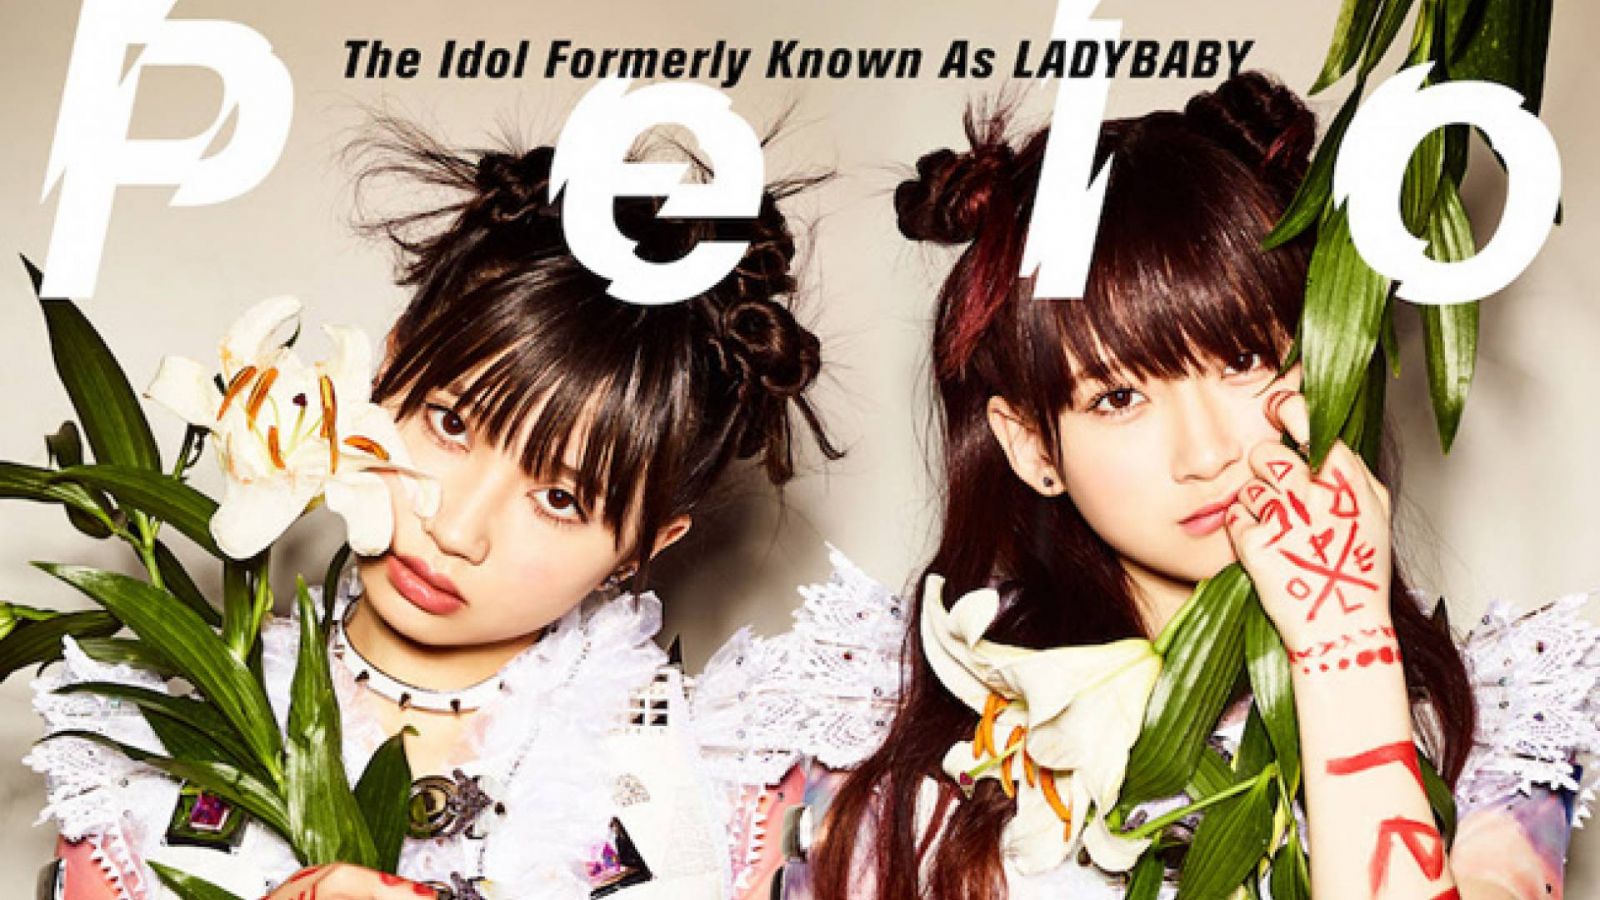 The Idol Formerly Known As LADYBABY © LADYBABY PROJECT. All rights reserved.